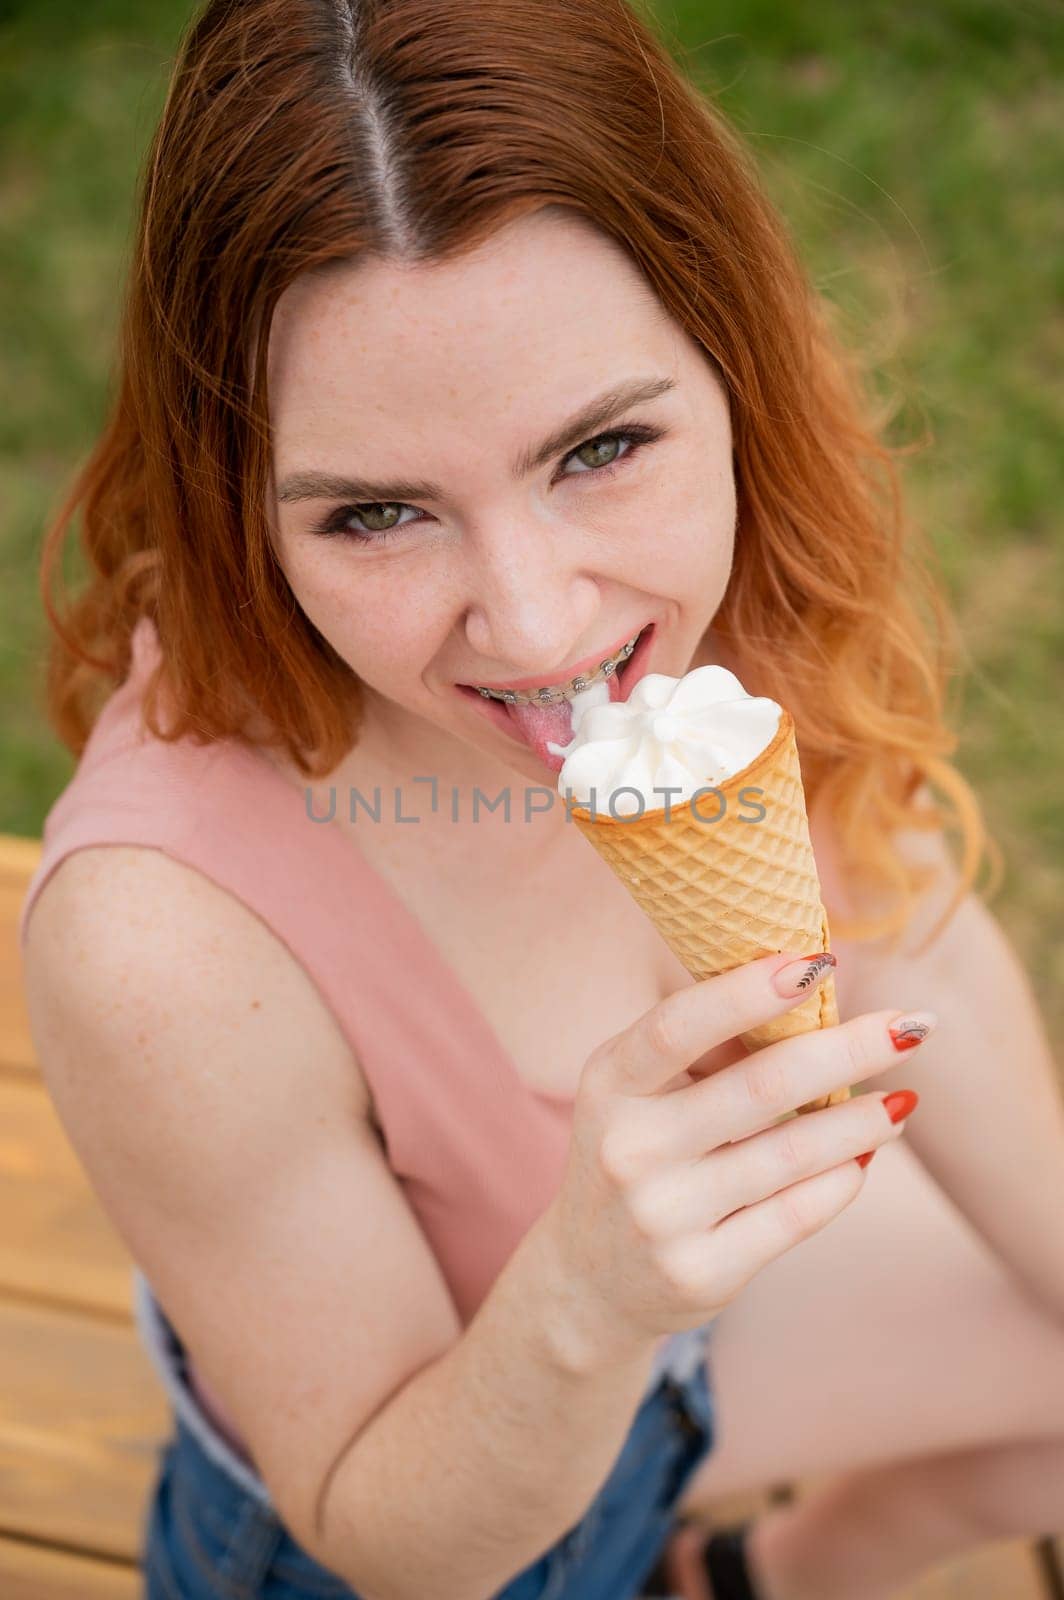 Young beautiful red-haired woman smiling with braces and eating an ice cream cone outdoors. Vertical photo. by mrwed54